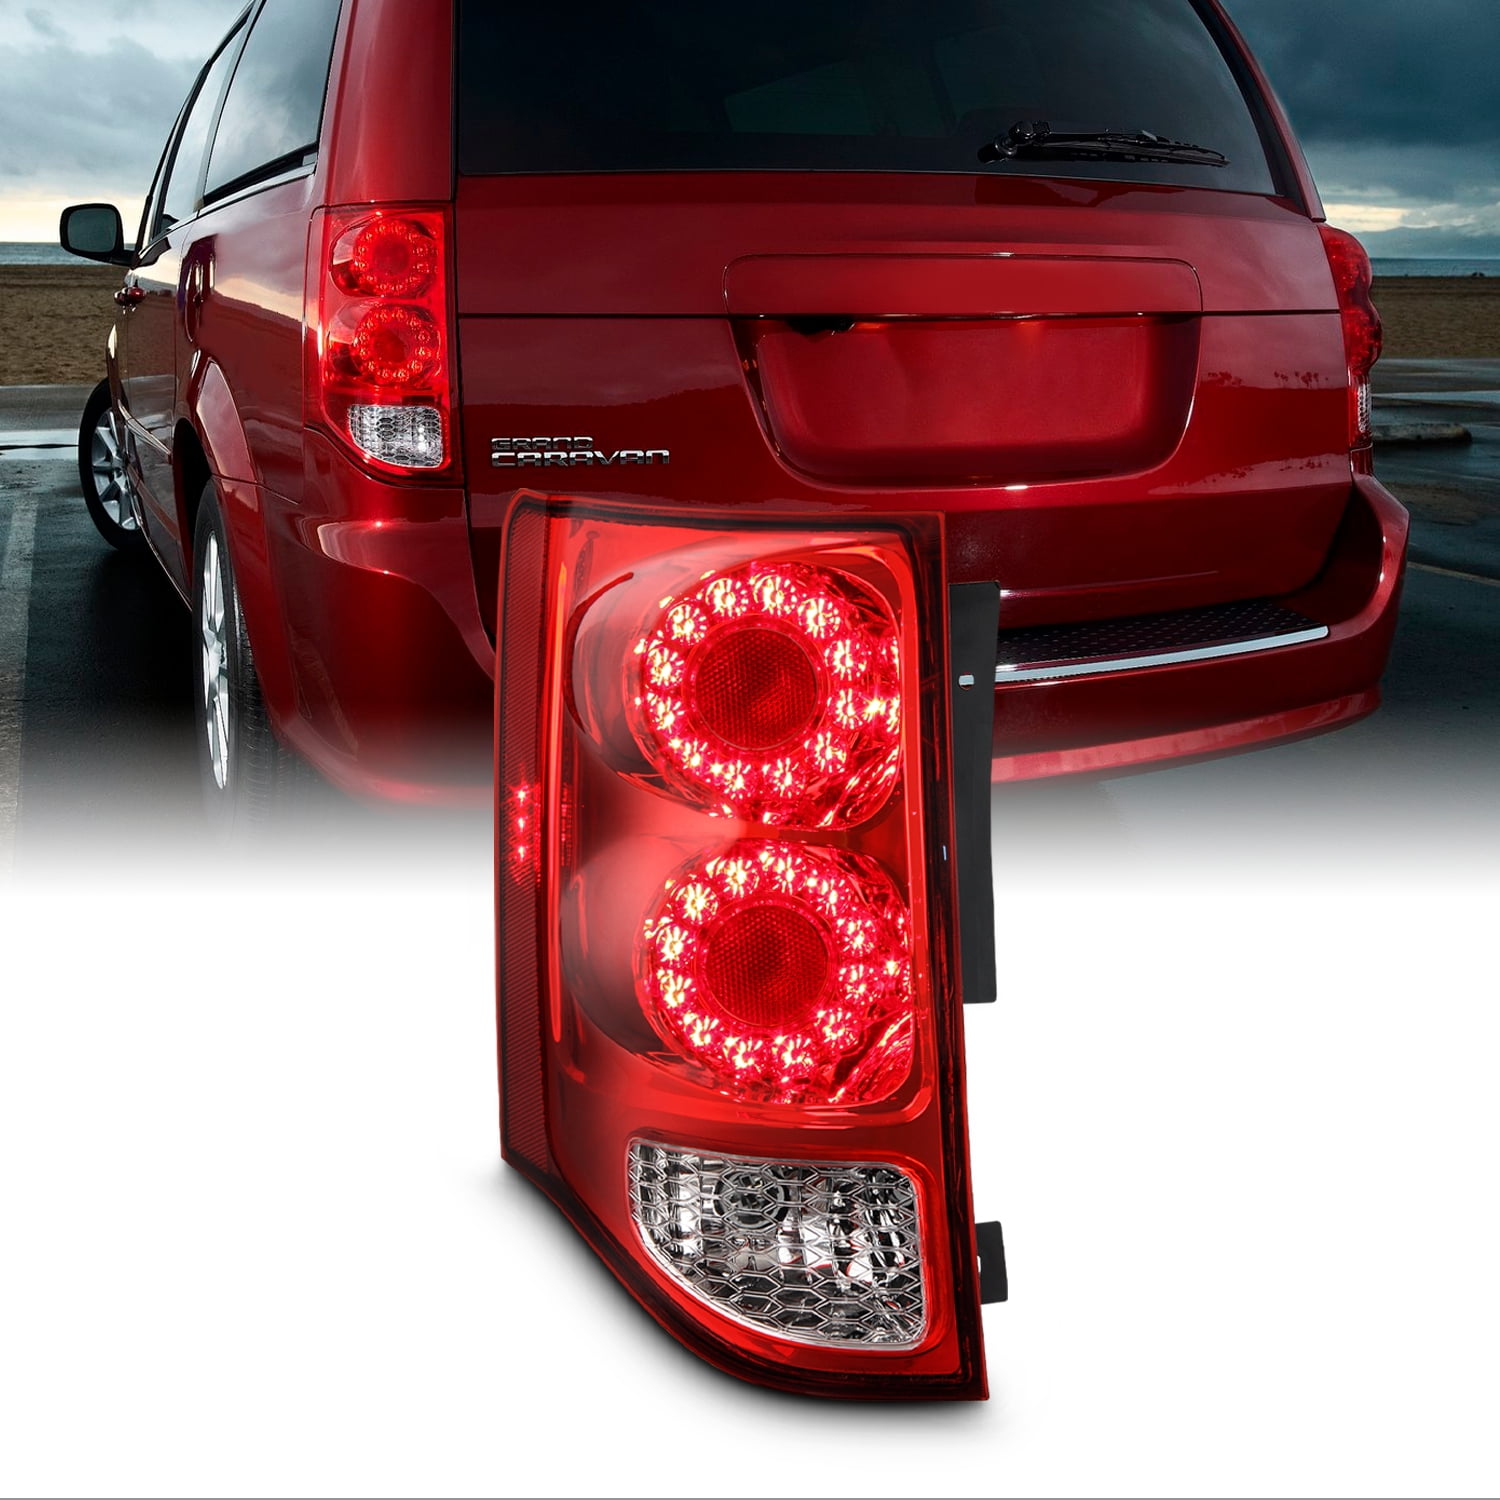 Nakuuly Tail Light Compatible SE33 With 2011-2020 Dodge Grand